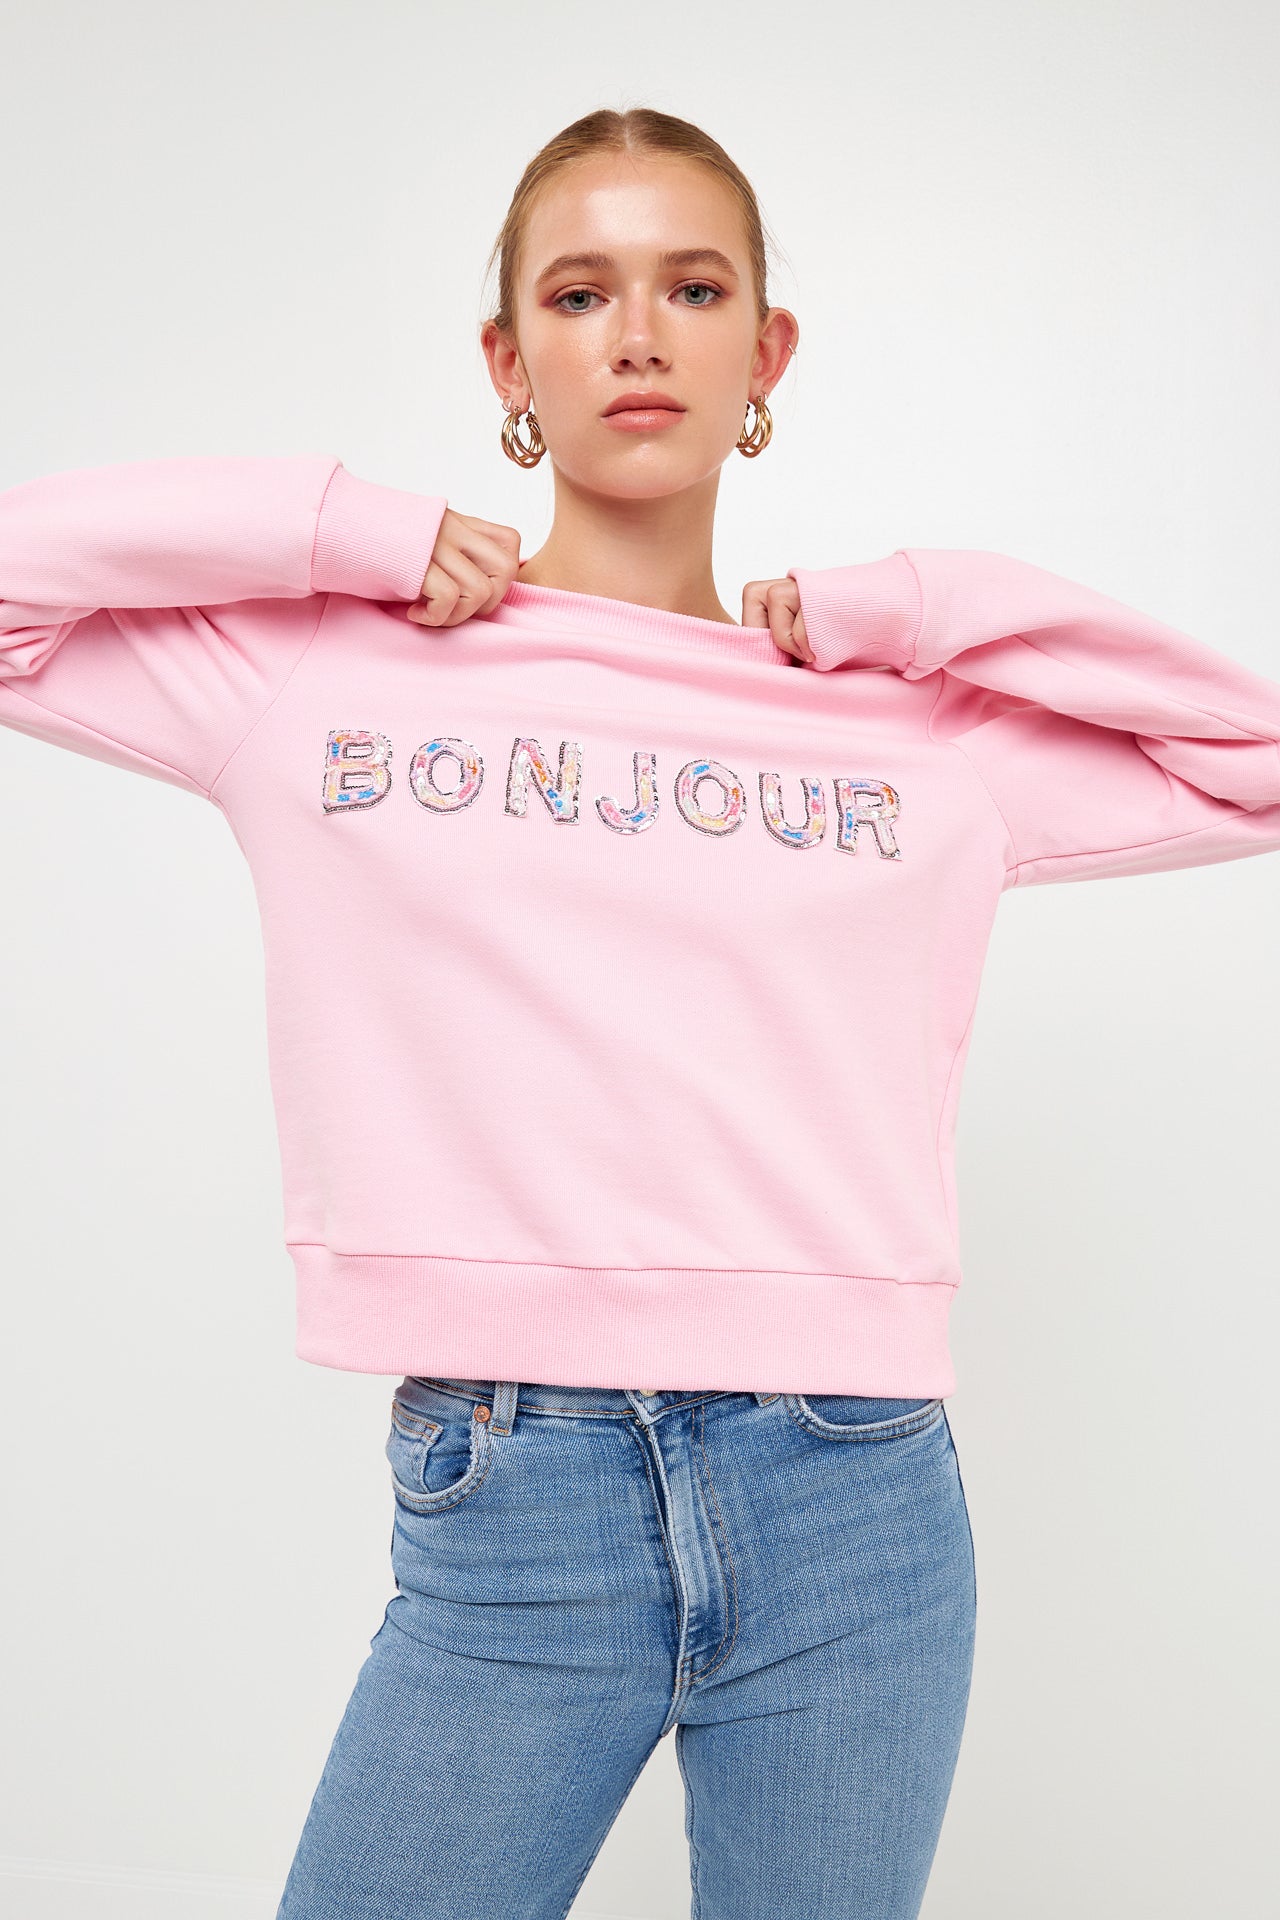 ENDLESS ROSE - Lettering Beads Sweatshirt - SWEATERS & KNITS available at Objectrare